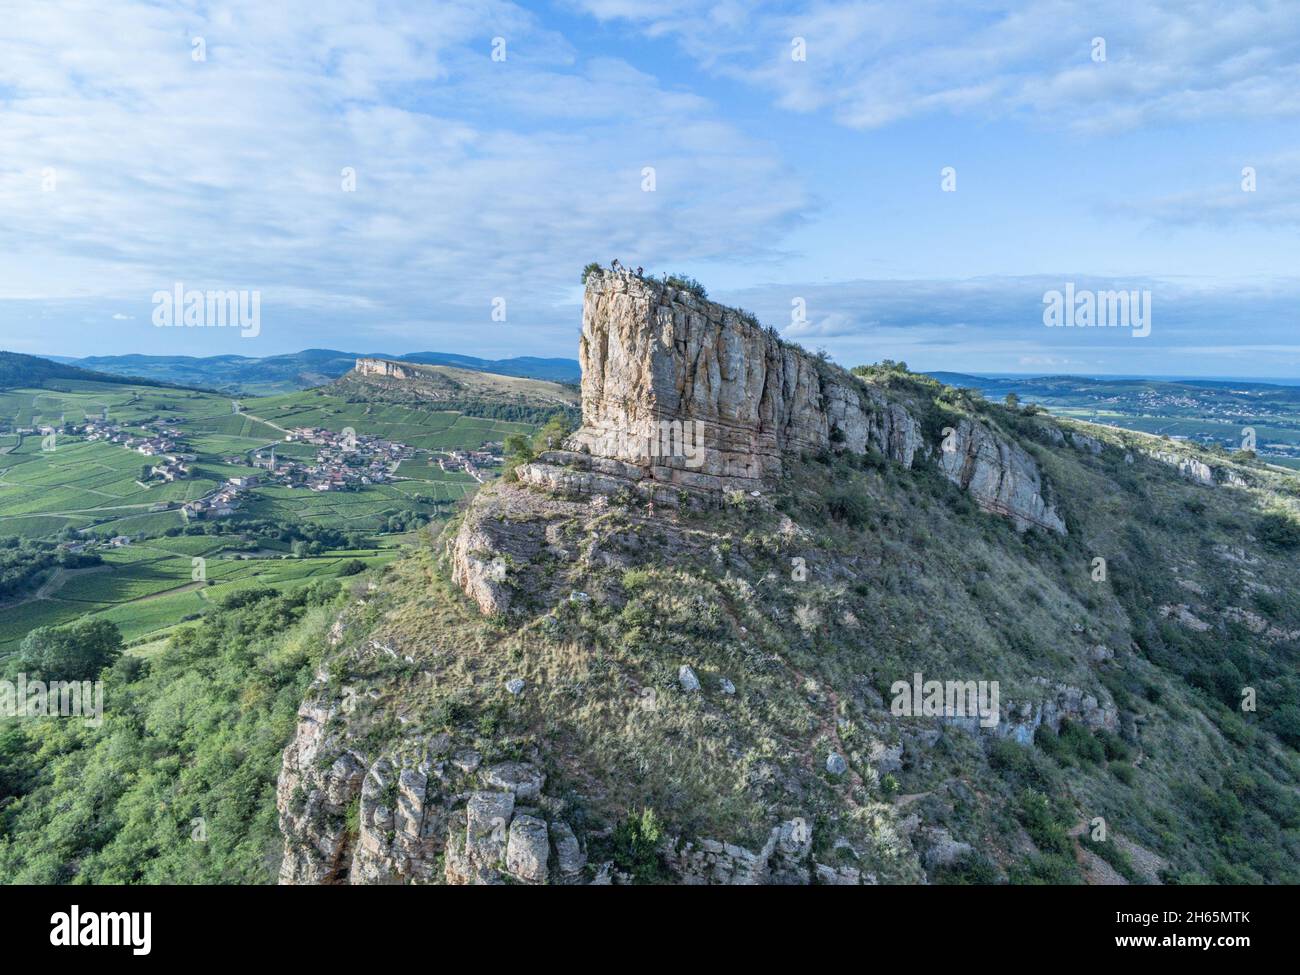 France, Saone et Loire, Maconnais, Solutre Pouilly, the Rock of Solutré and the Rock of Vergisson in the background (aerial view) Stock Photo